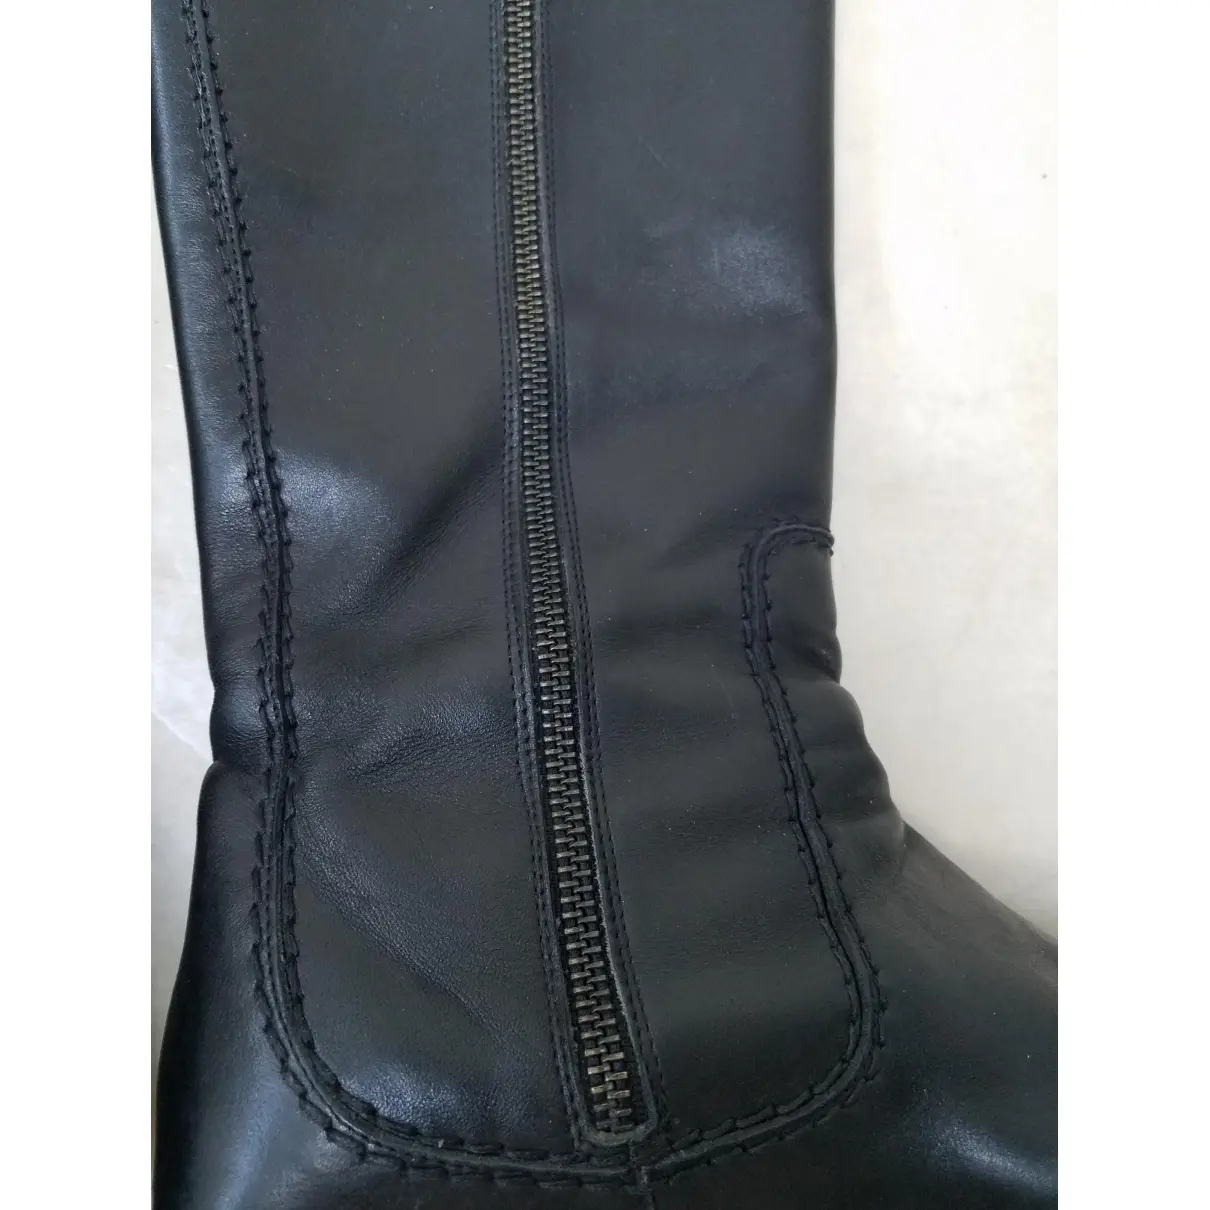 Hogan Leather riding boots for sale